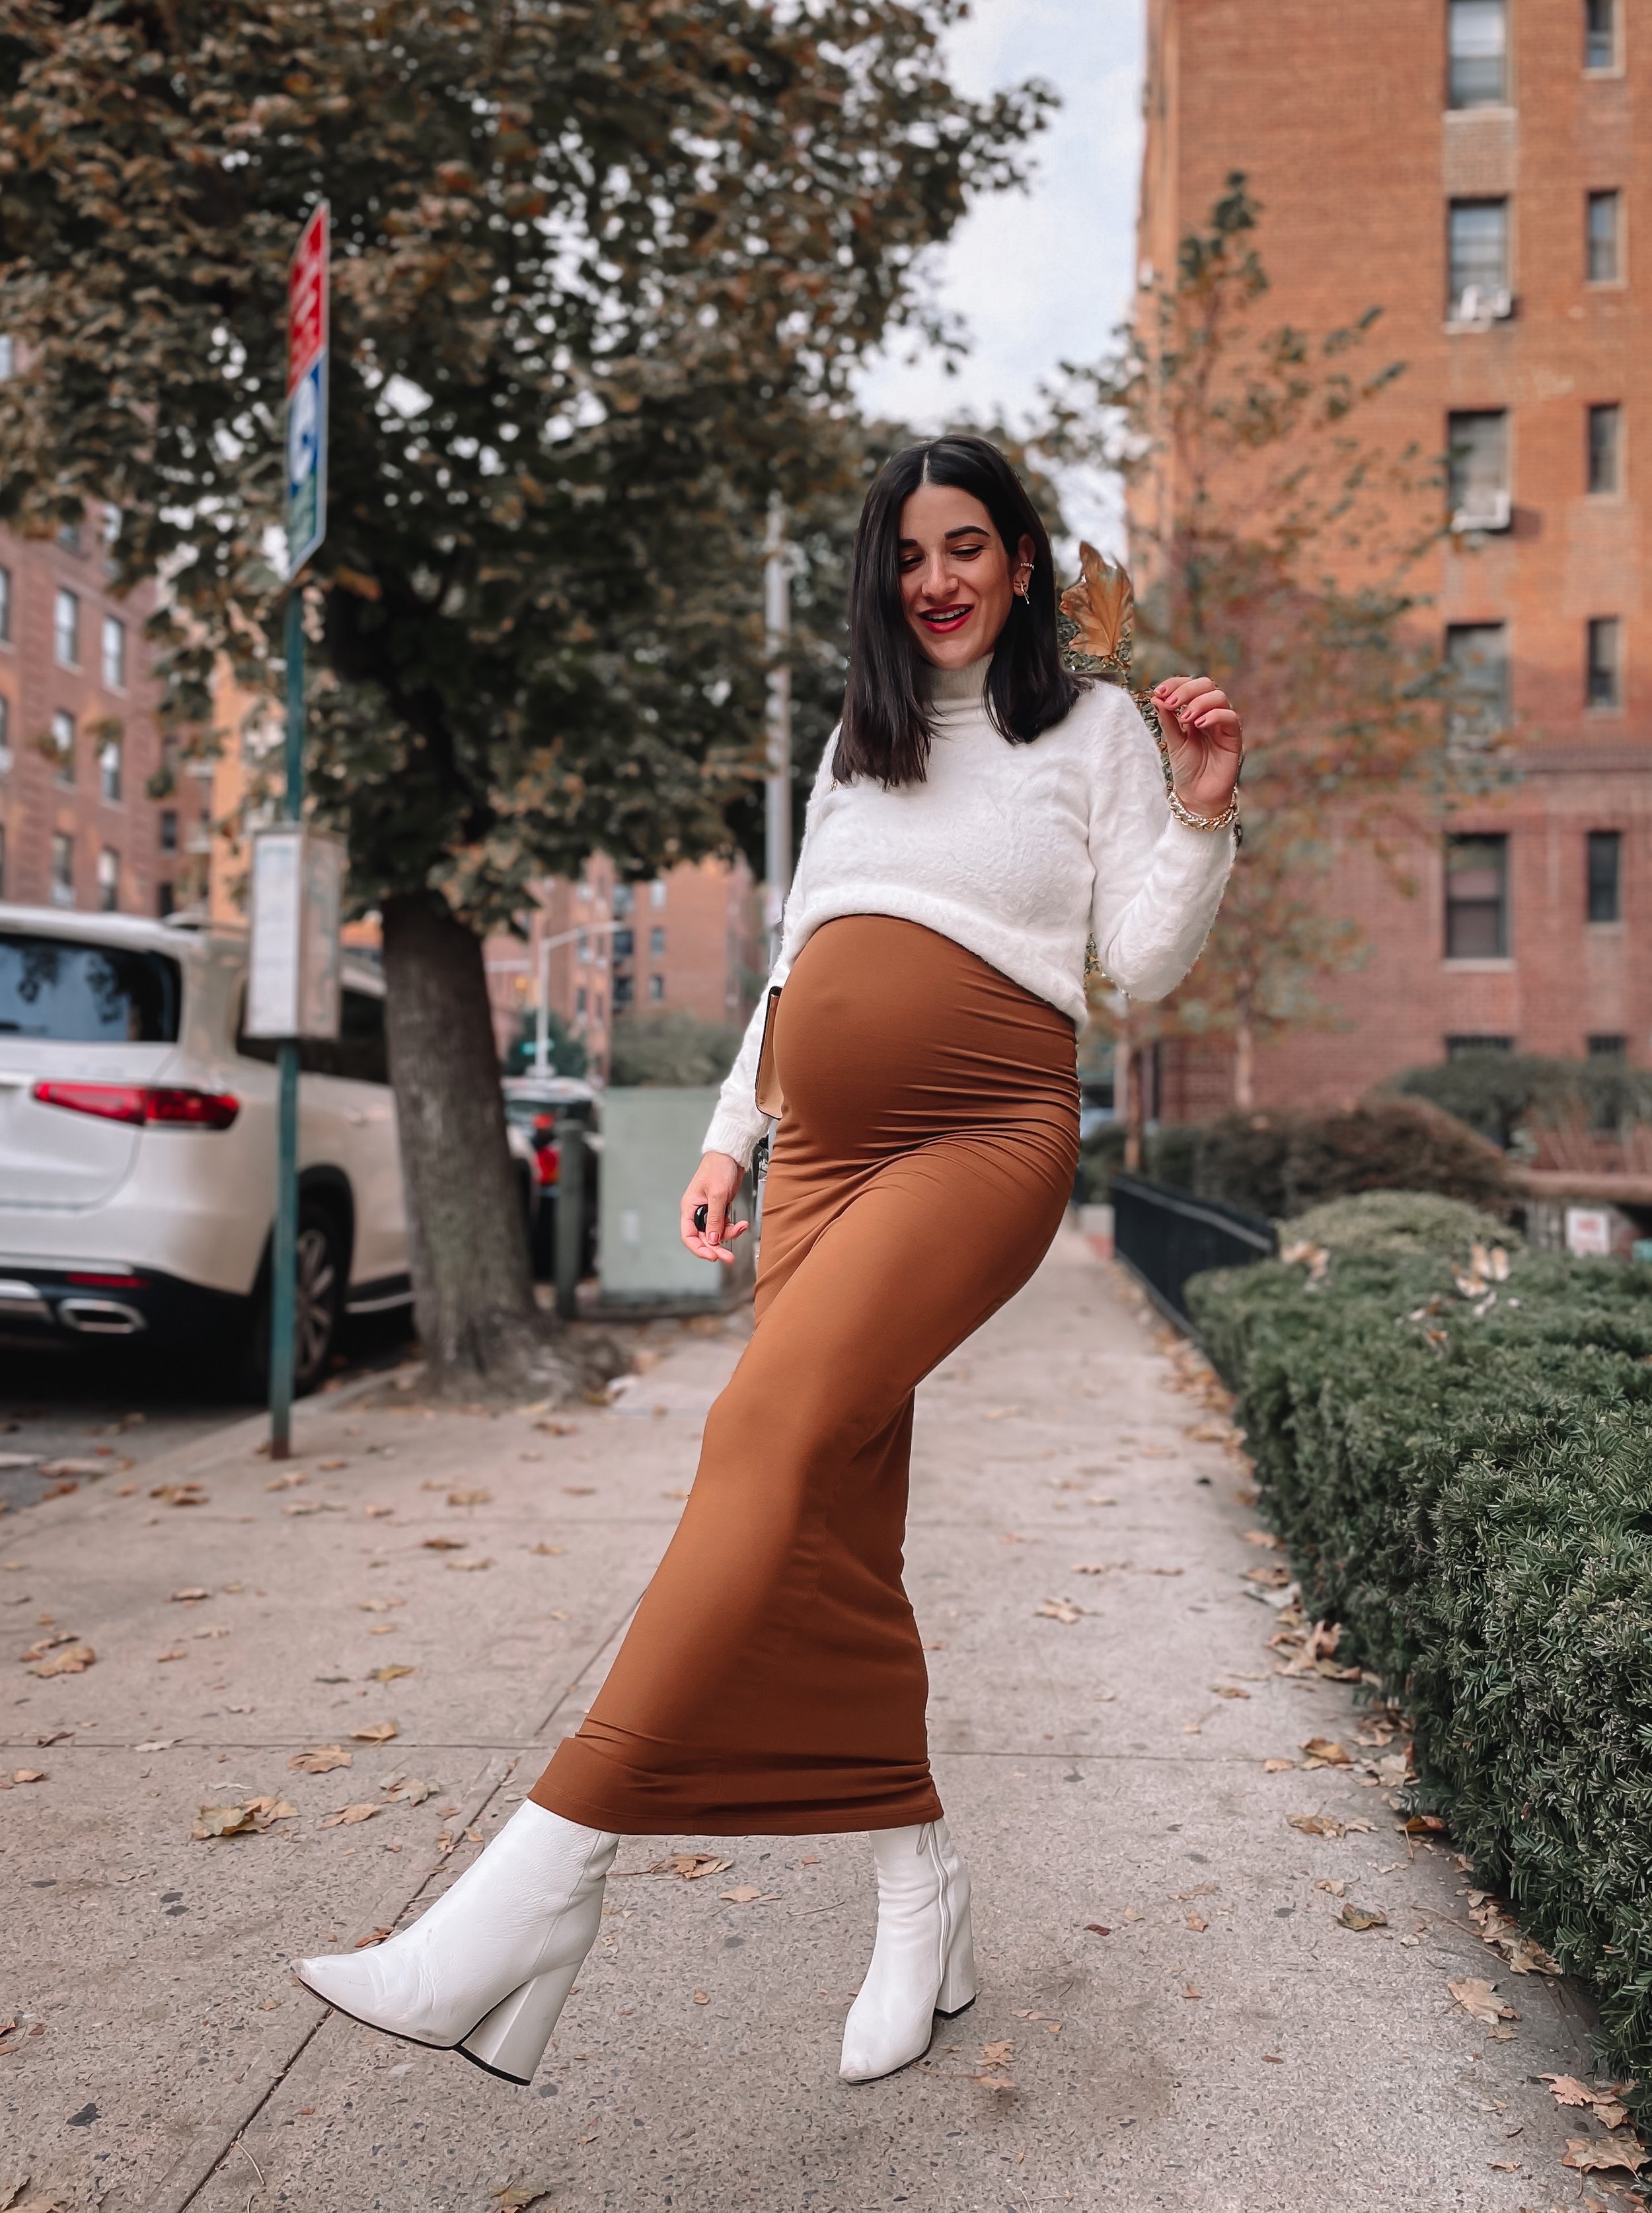 Fall Bump Styling 37 Weeks Pregnant Esther Santer NYC Street Style Blogger Bumpsuit The Jane Dress Toffee White Booties Mango Sweater What to Wear How To Style Bumpdate Women OOTD Belly Tripod Photoshoot Due Date Epecting First Time Mom Maternity Girl.JPG